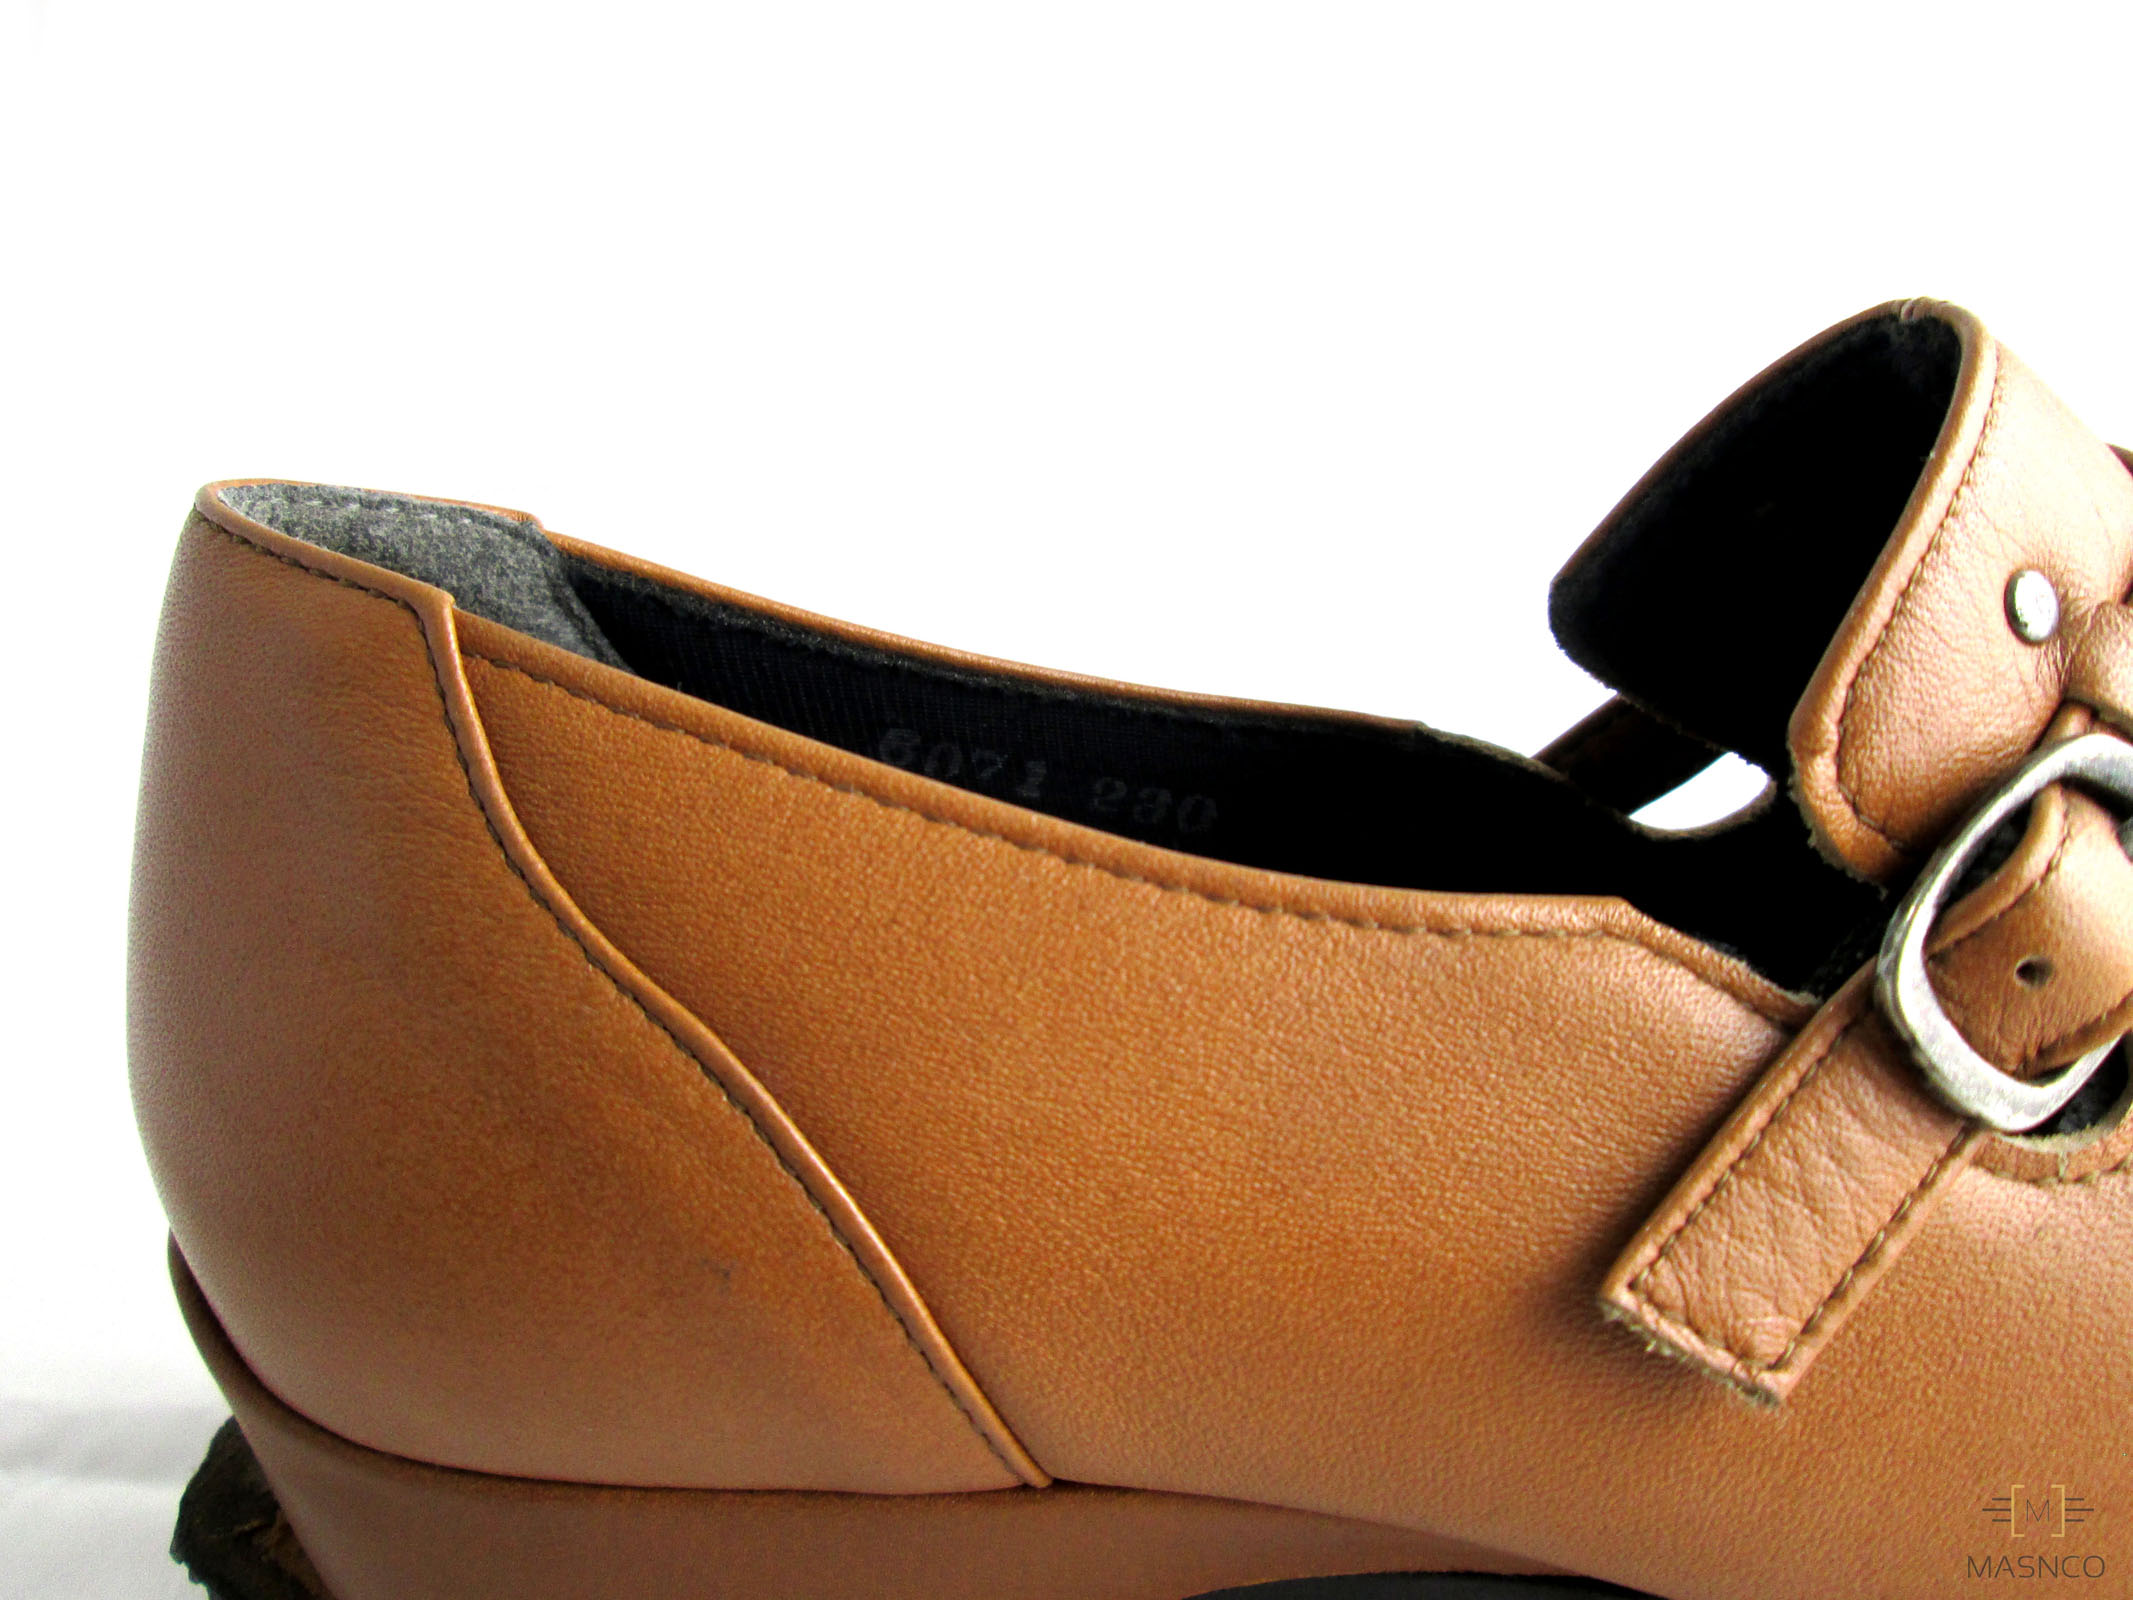 Formal Genuine leather shoe with straps for Women (Brown)